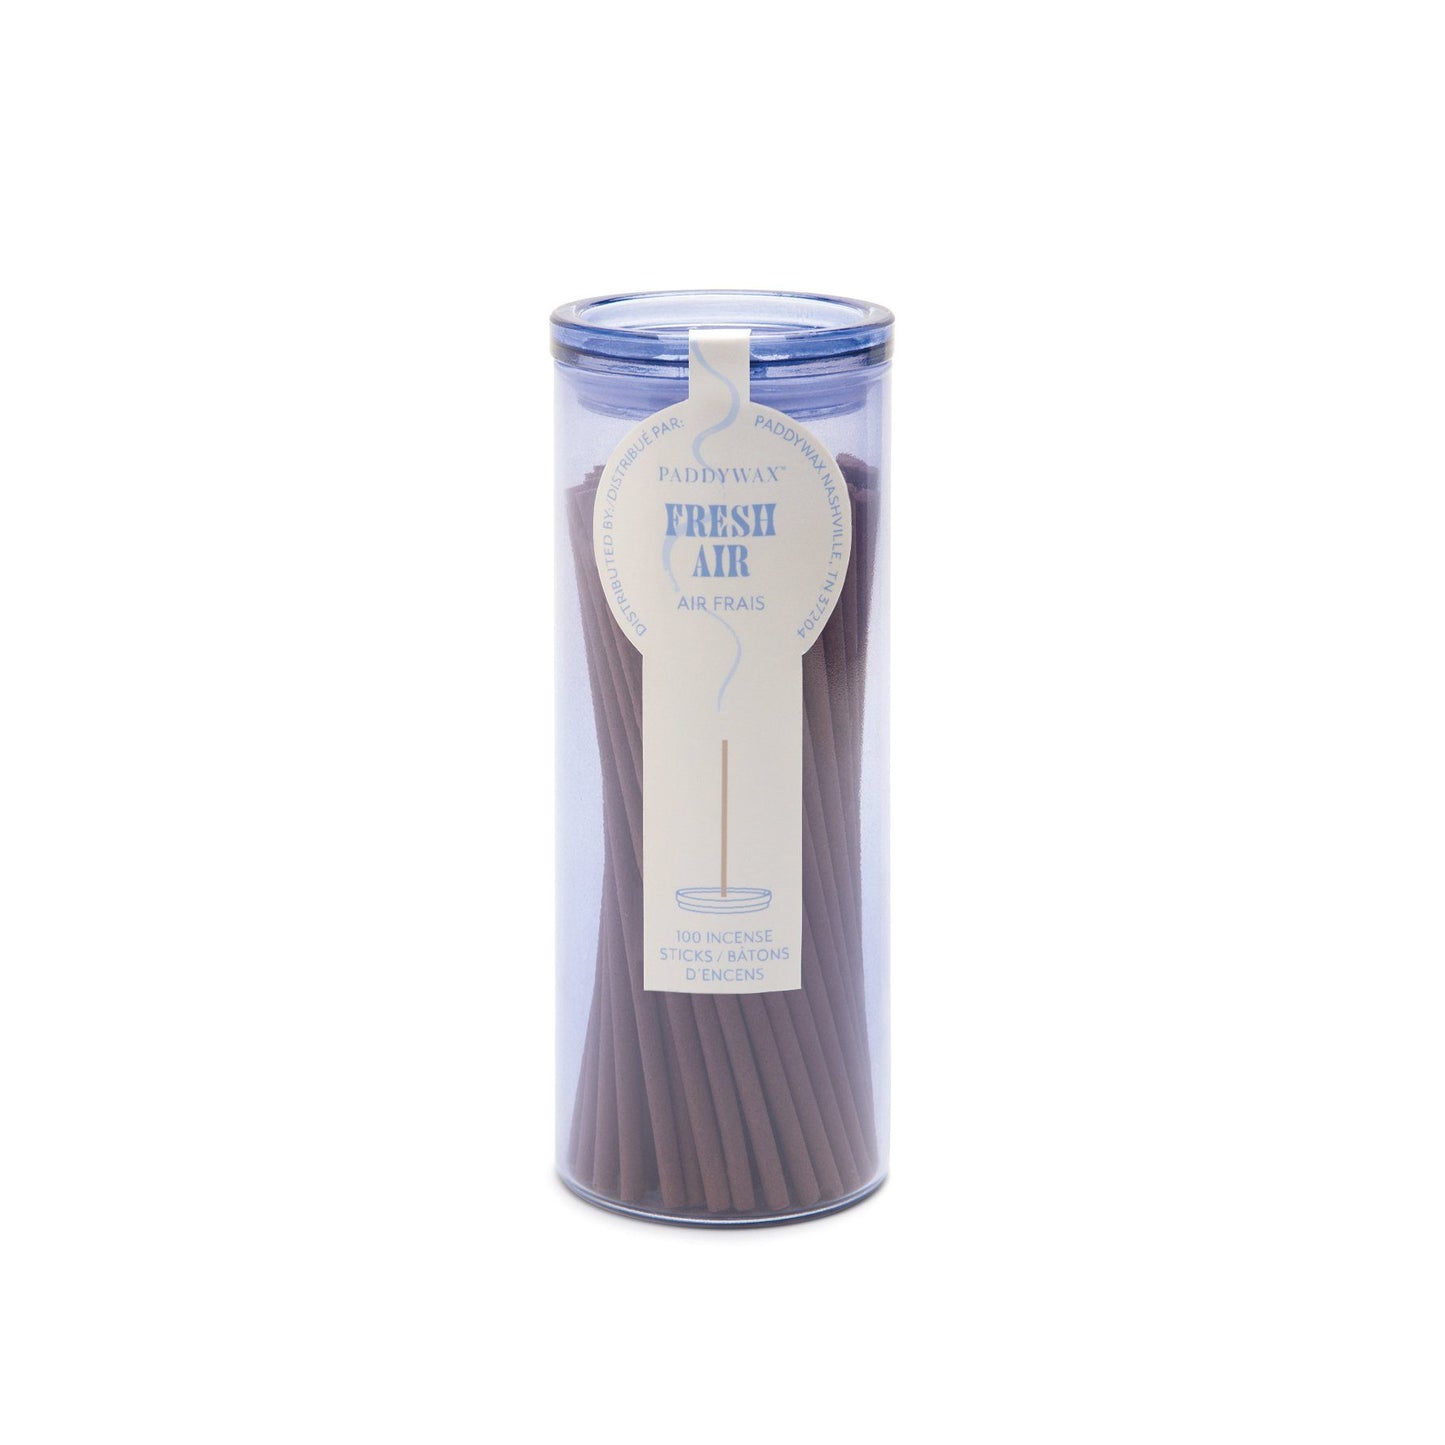 Blue glass cylinder with white label holding 100 incense sticks for flameless fragrance